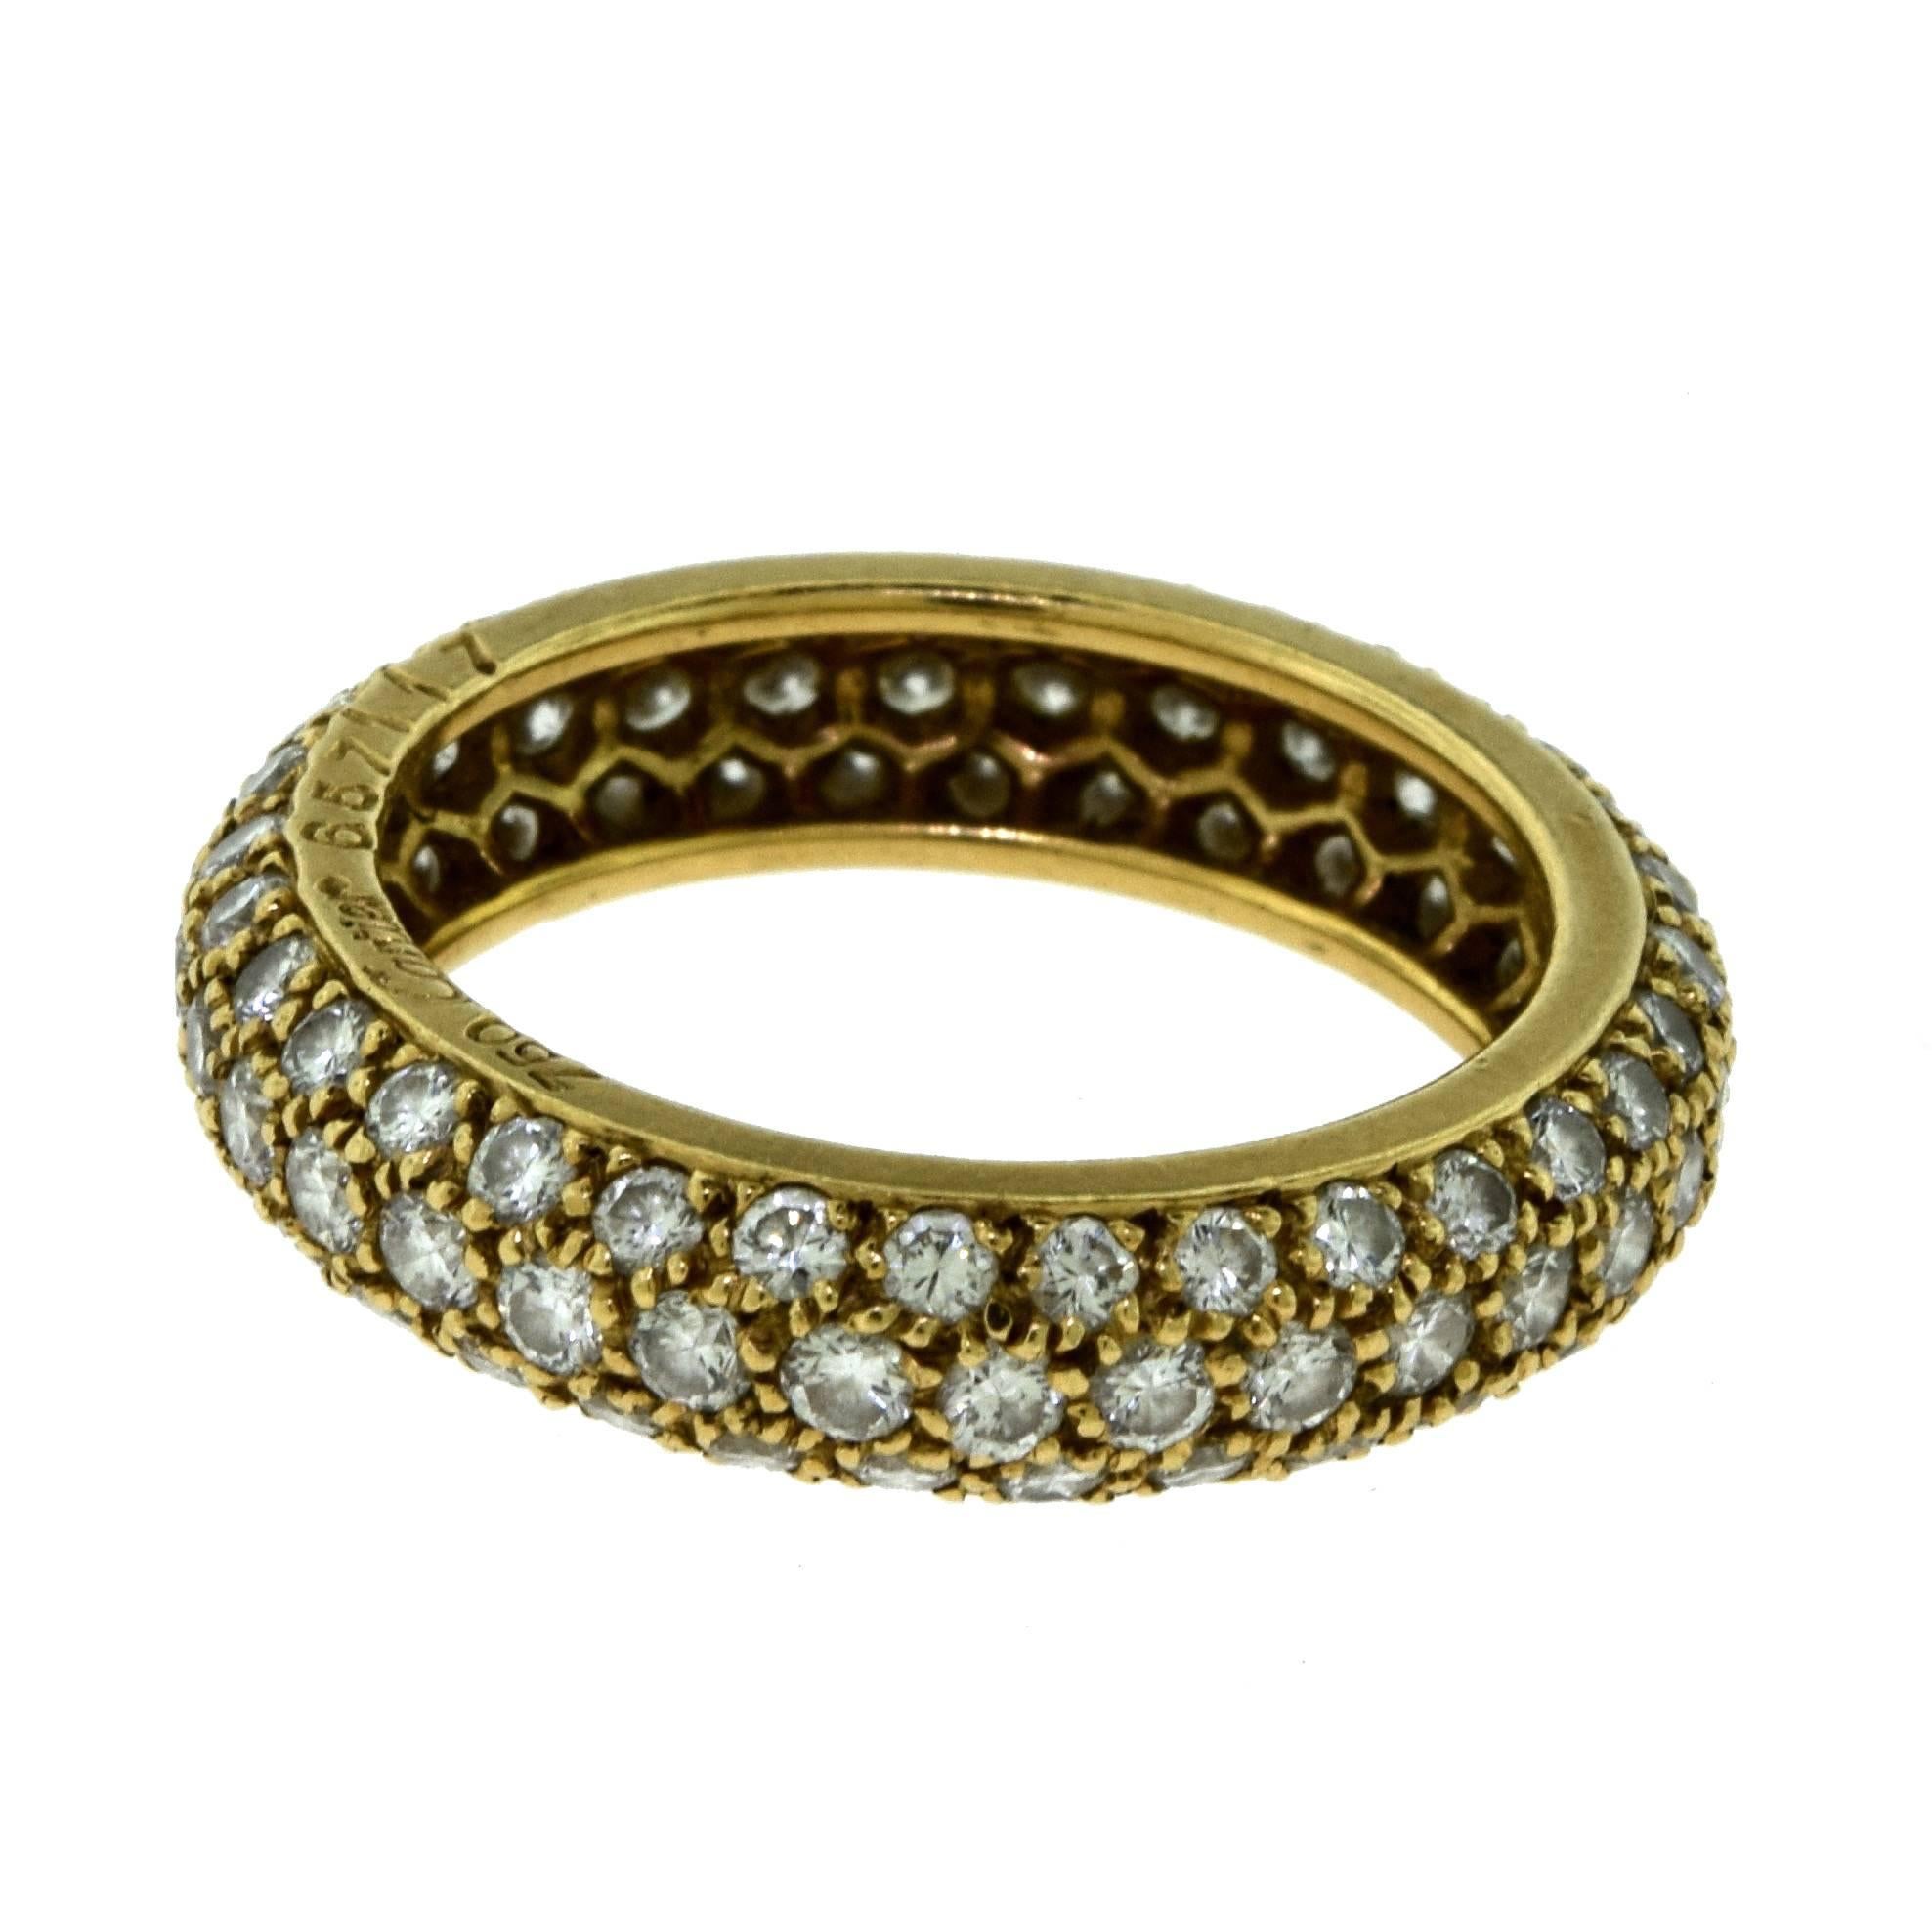 Vintage Cartier Pave Diamond Eternity Ring in 18 Karat Yellow Gold For Sale